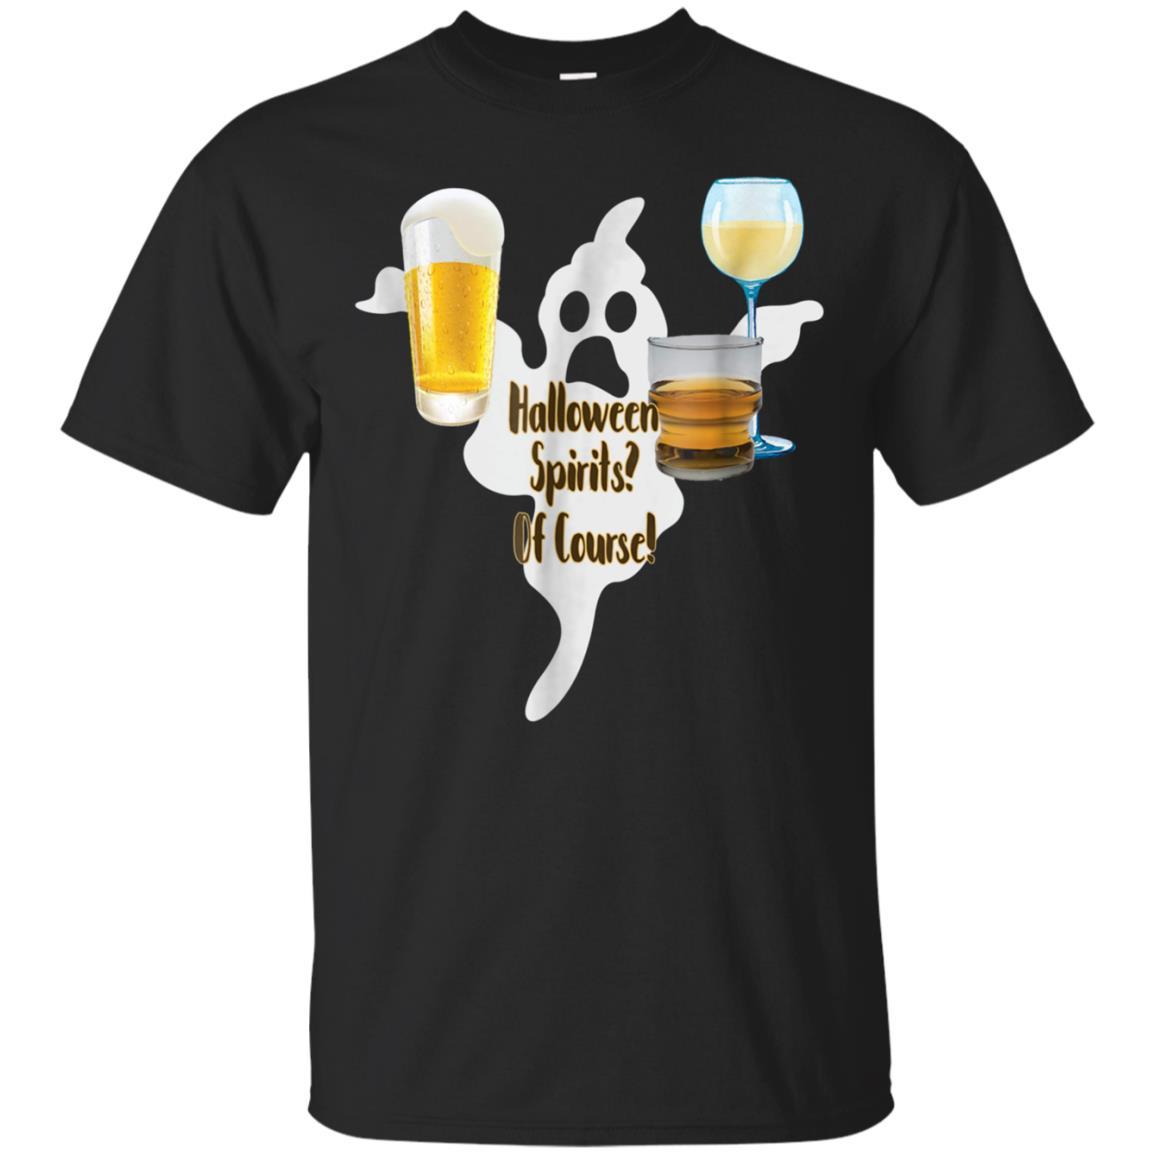 Halloween Spirits? Of Course Ghost Beer Wine Whiskey Shirt